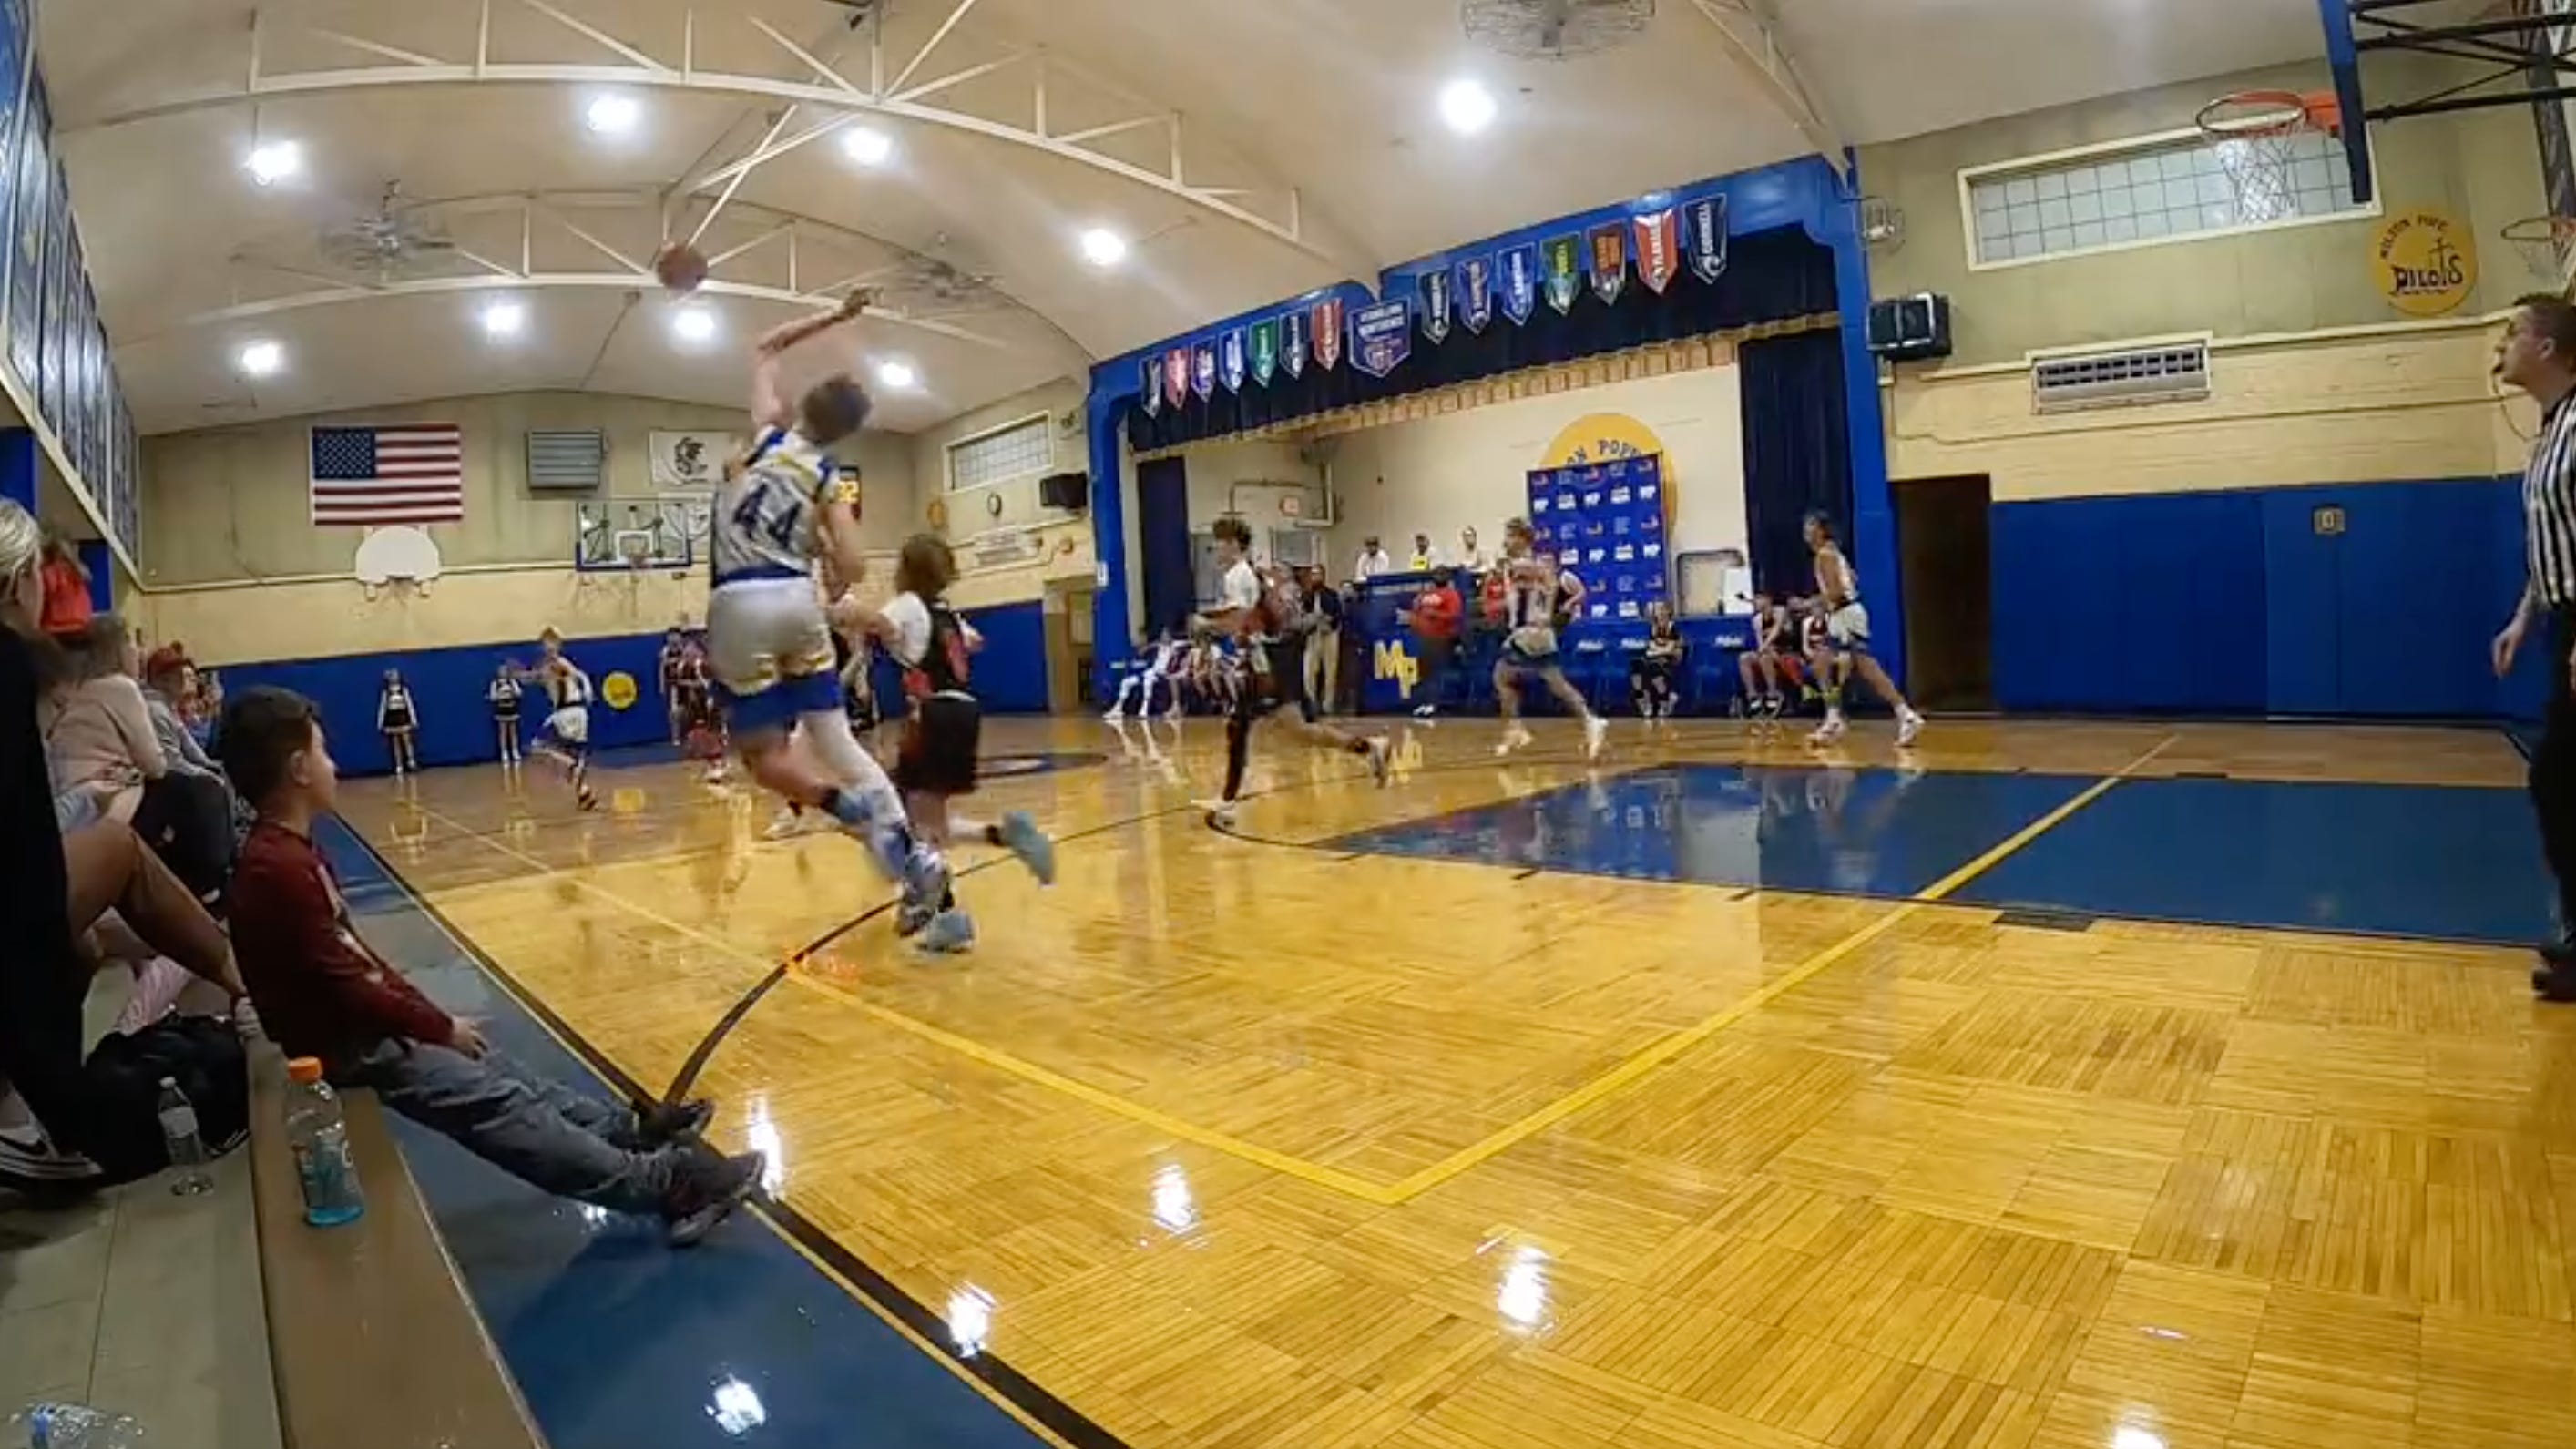   
																Illinois eighth-grader hits miraculous full-court buzzer-beater to win game 
															 